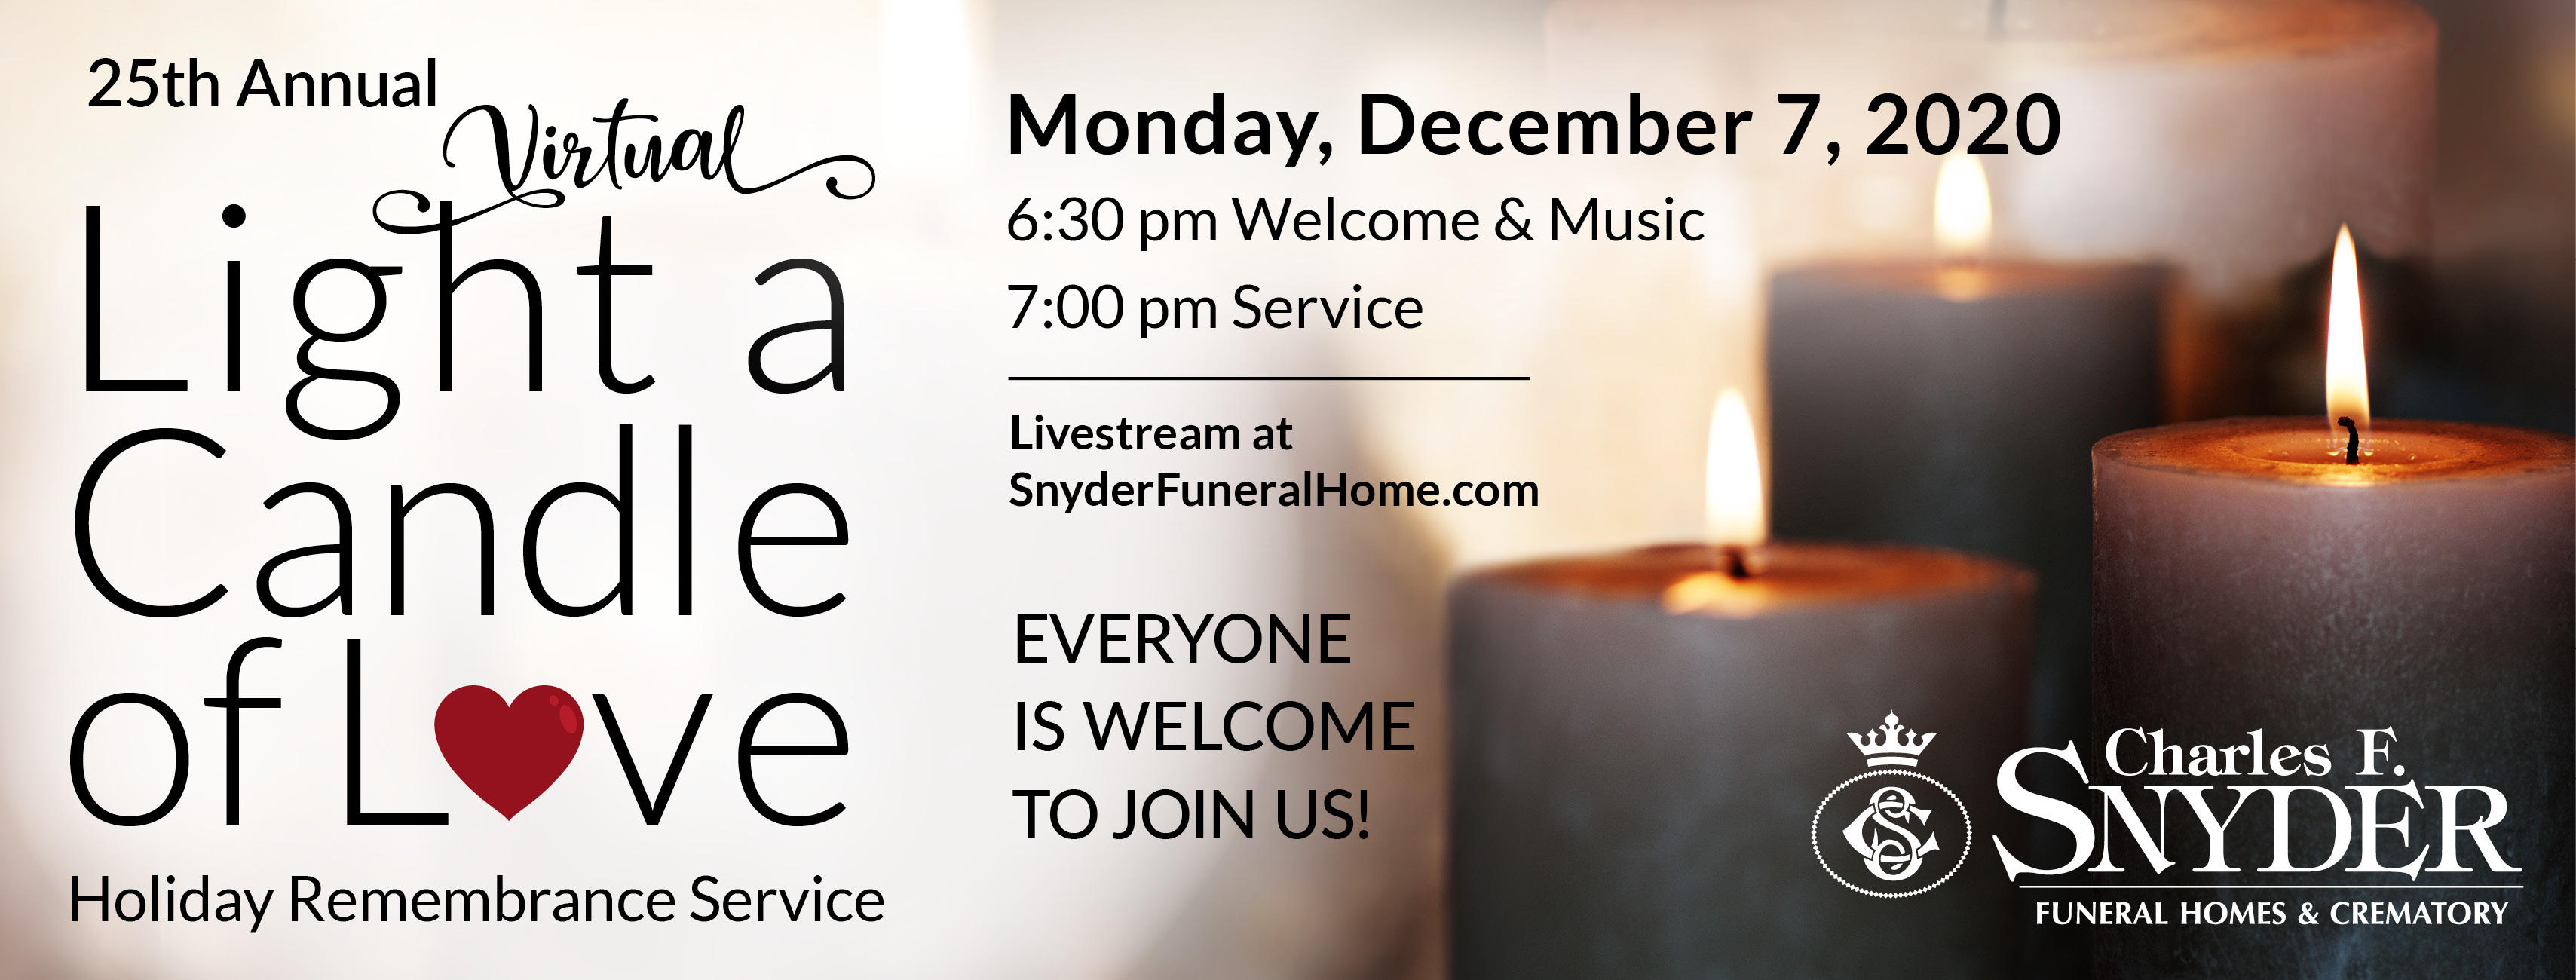 Charles F Snyder Funeral Home & Crematory - King Street Location